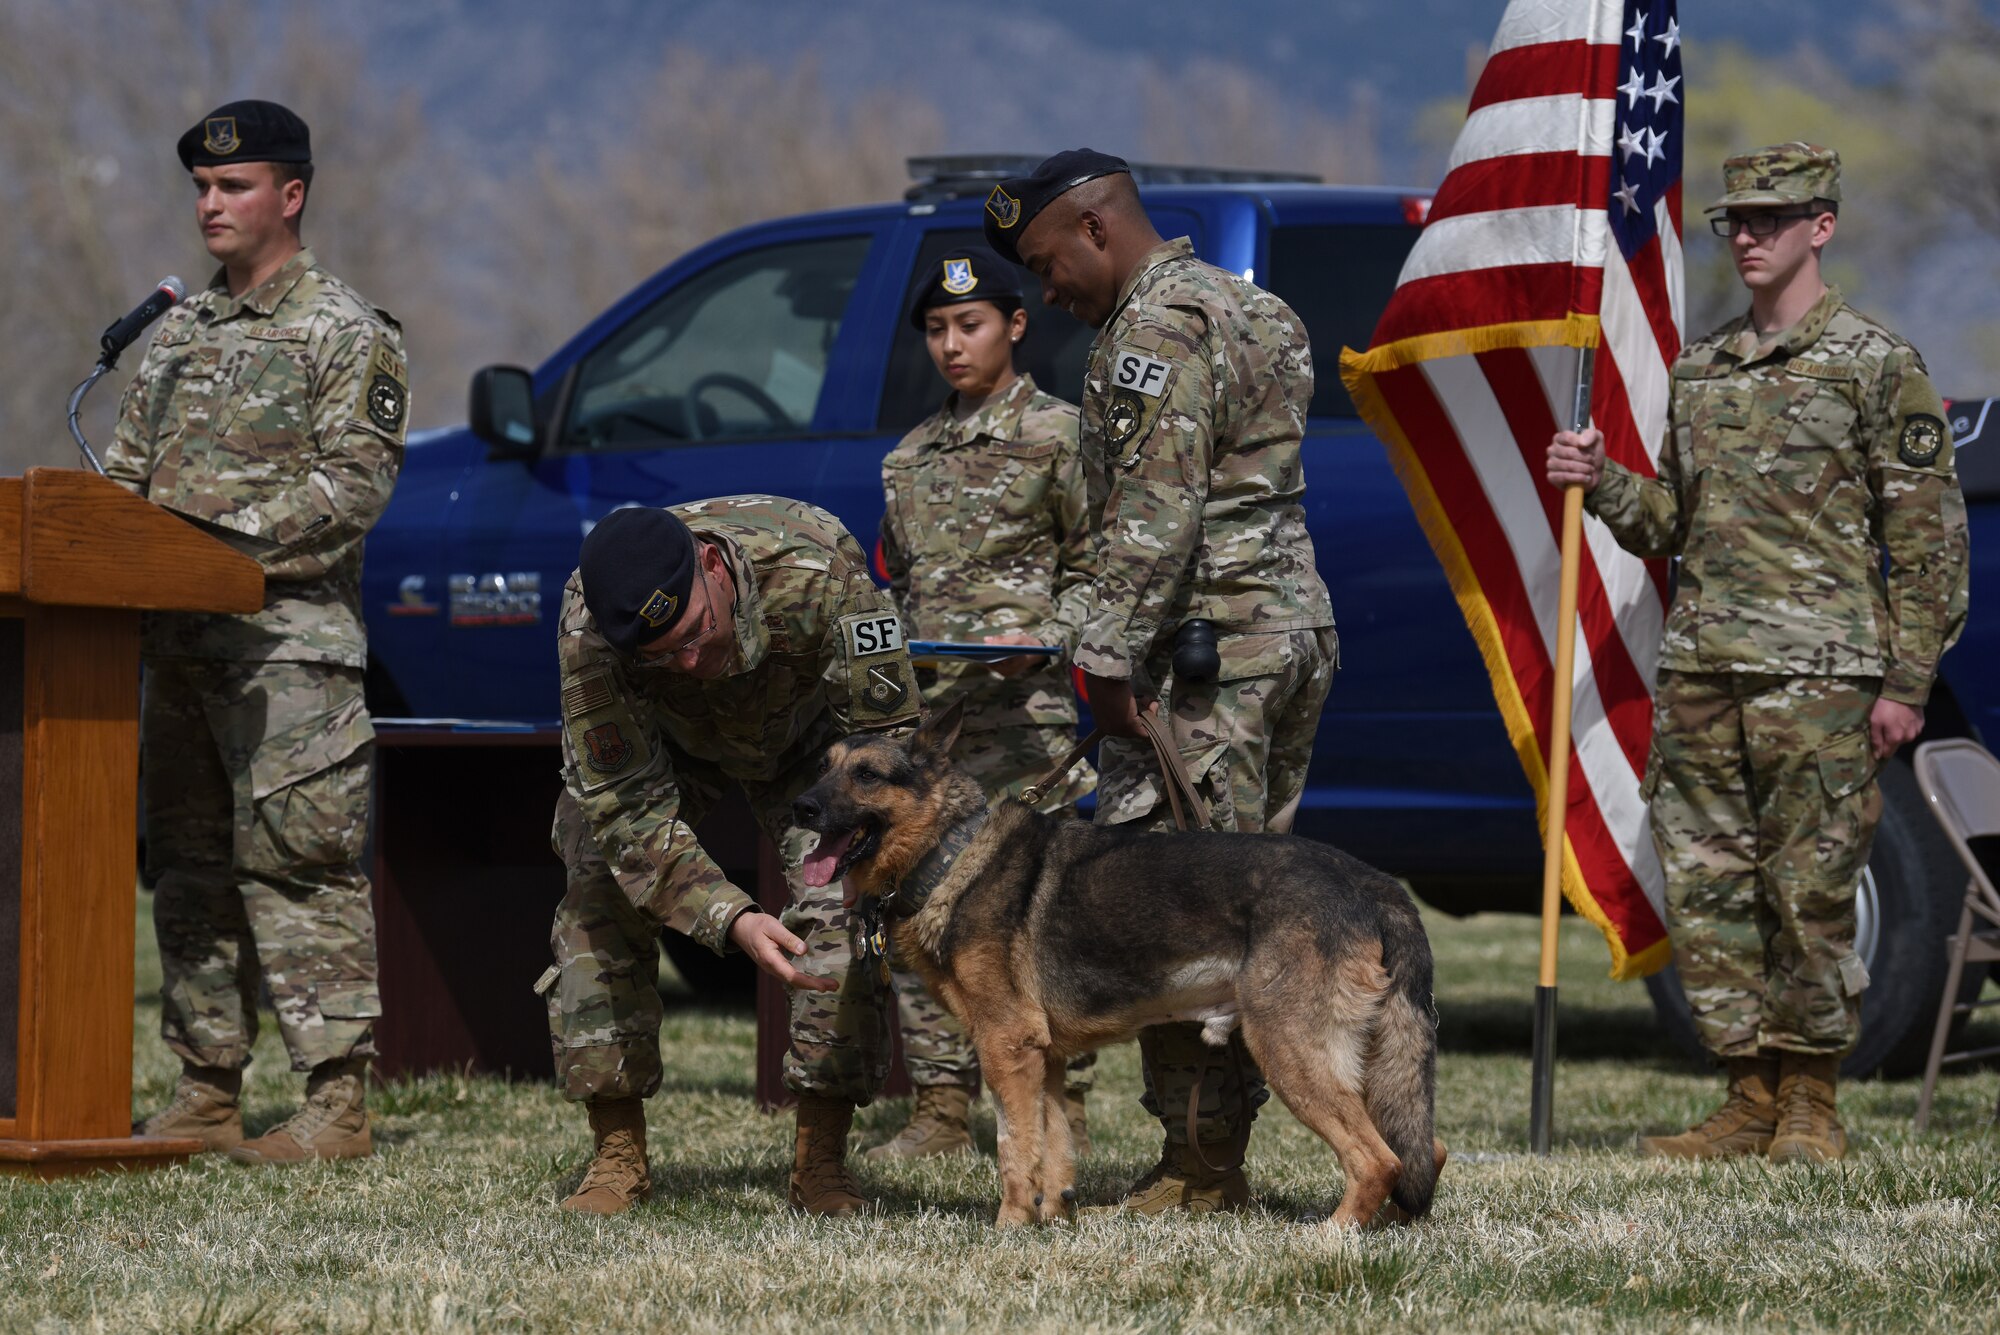 U.S. Air Force Col. Theodore Breuker, 377th Security Forces Group commander, presents Military Working Dog Boris with a Commendation Medal during Boris’s retirement ceremony at Kirtland Air Force Base, N.M., March 26, 2019. Boris retired after serving eight years at Kirtland, during which he suffered multiple heat related injuries as well as battled and defeated cancer. (U.S. Air Force photo by Senior Airman Eli Chevalier)